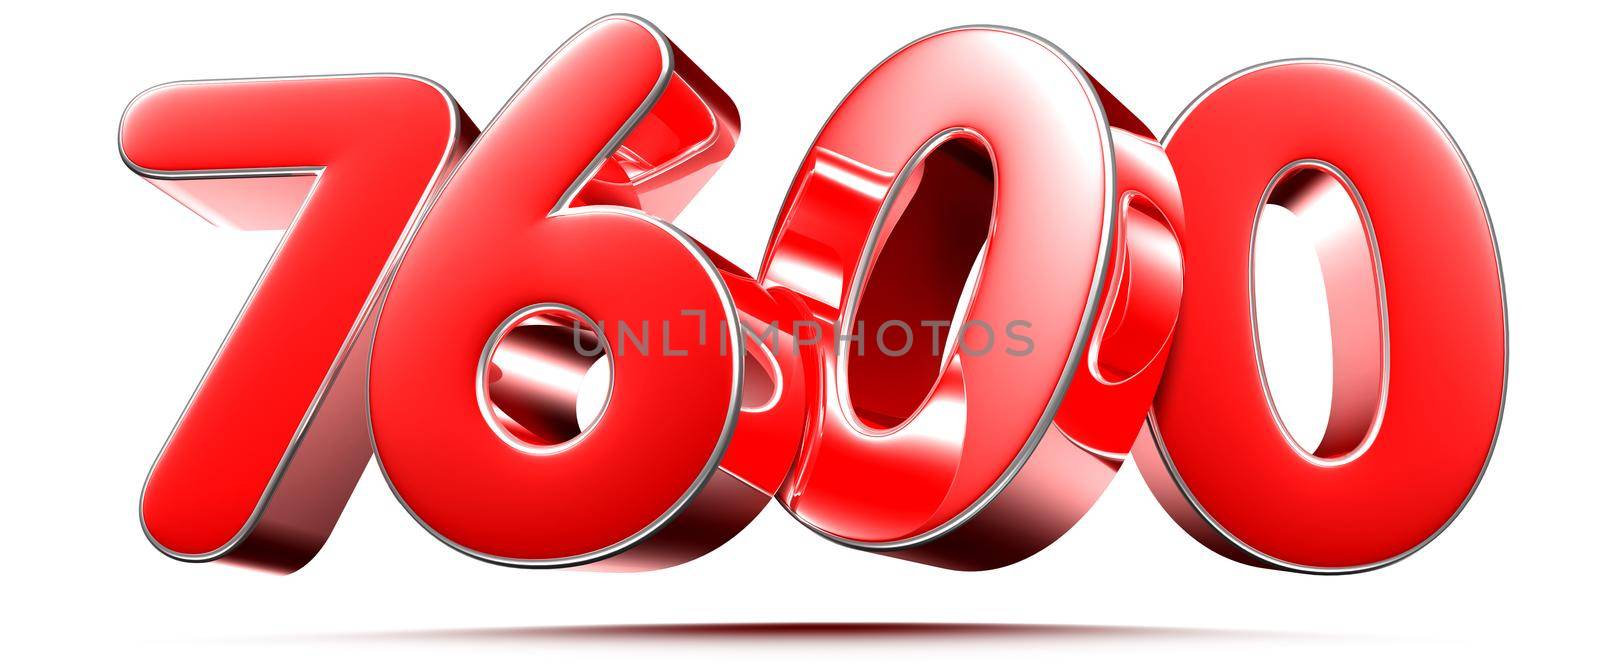 Rounded red numbers 7600 on white background 3D illustration with clipping path